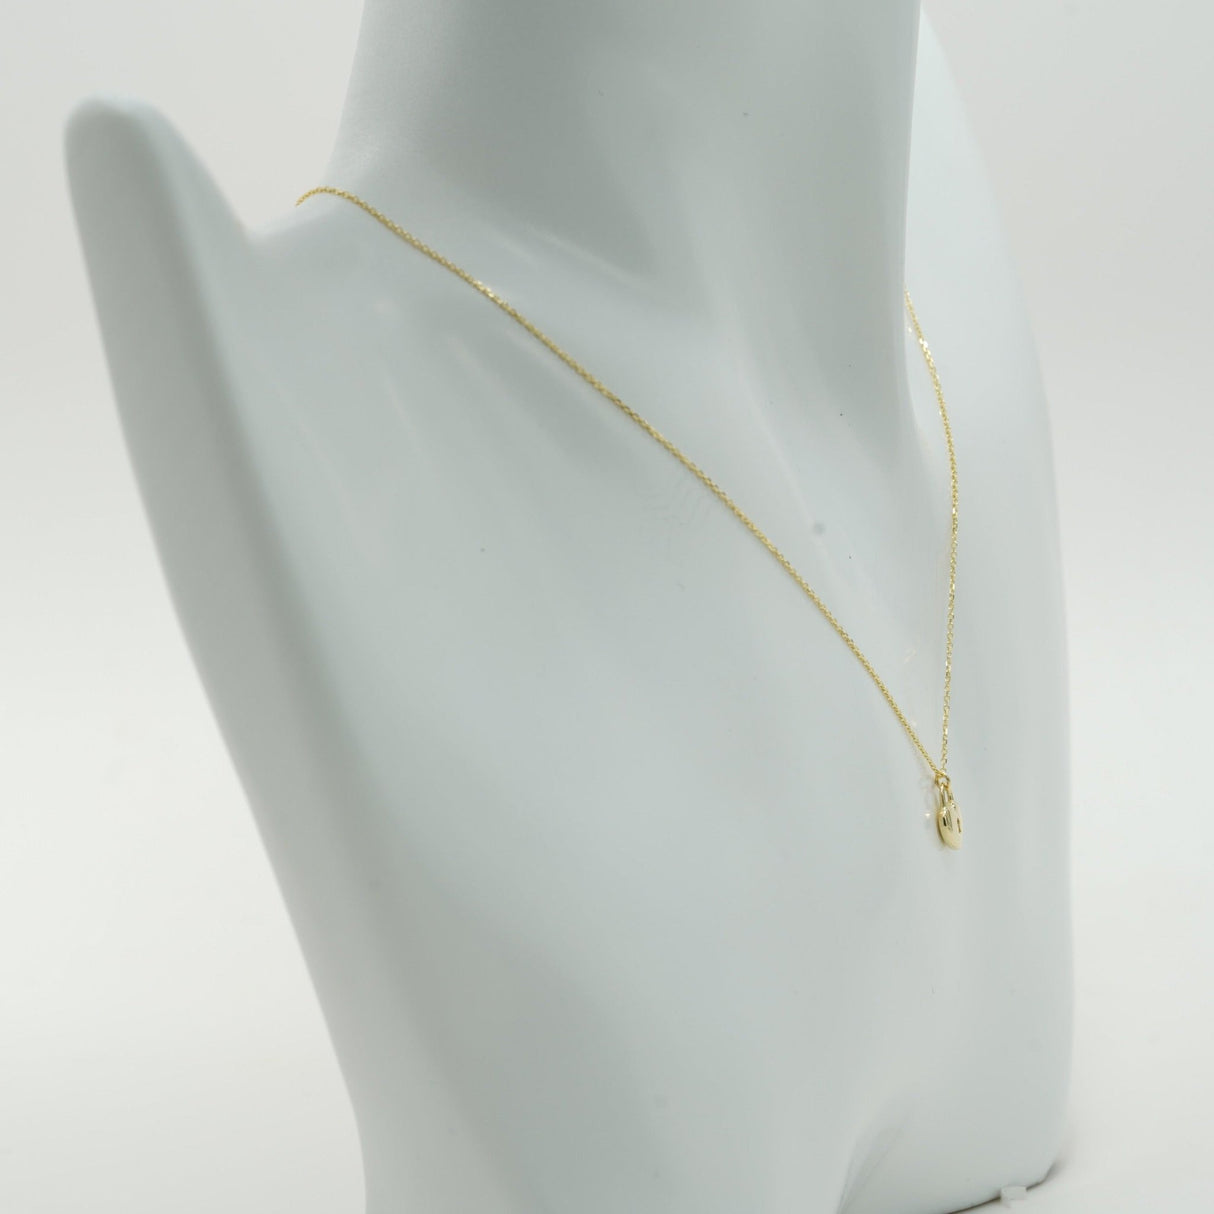 14K Gold Necklace, Heard Lock pendant Necklace, Trendy and Fashion Necklace,  Elegant and fashionable stackable gold necklace, trendy gold necklace for all occasions gift,  The photos are of real existing products without retouching.  Gold necklace from Diamond Origin,